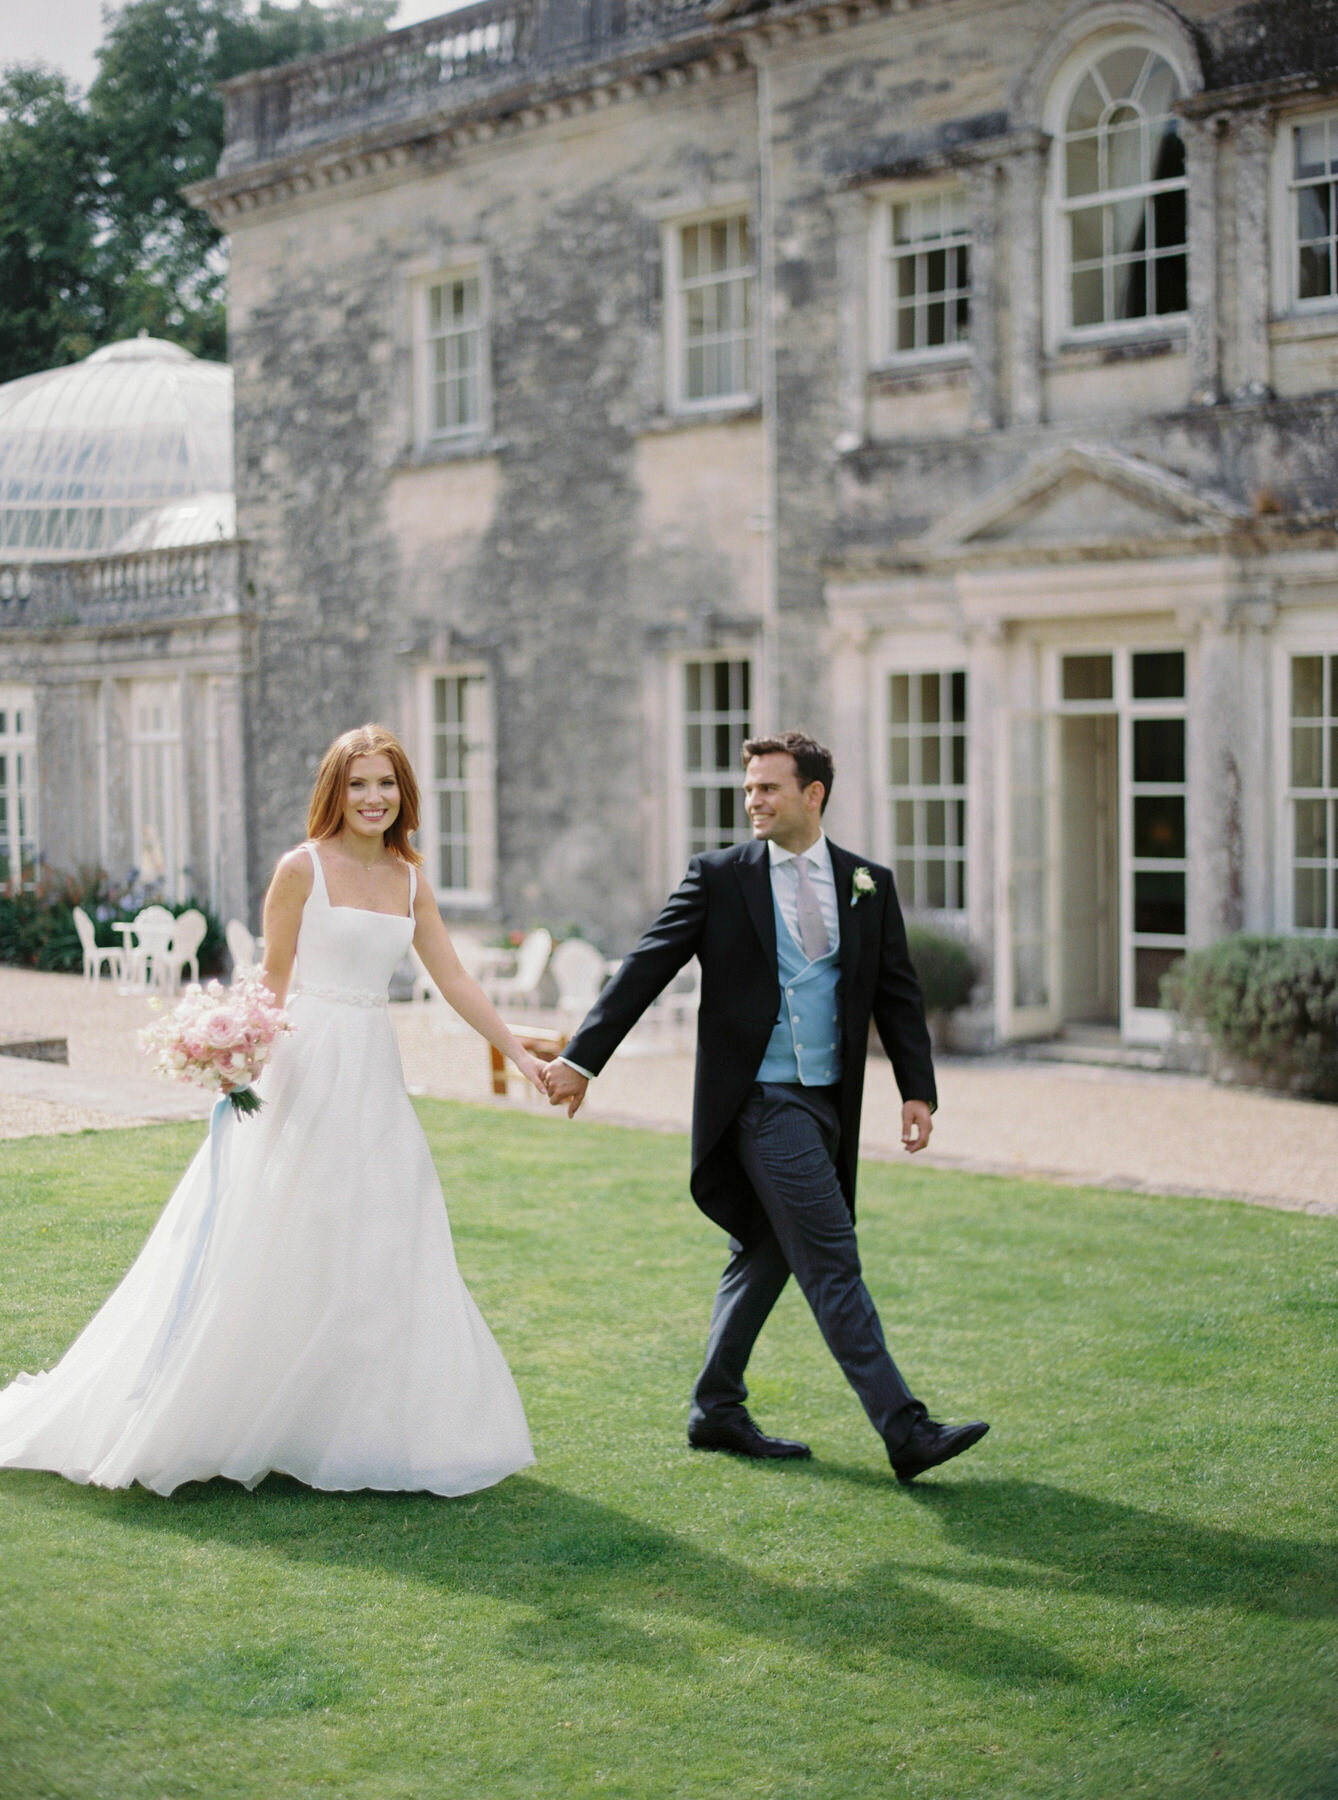 Bride and groom holding hands while walking in front of came house estate